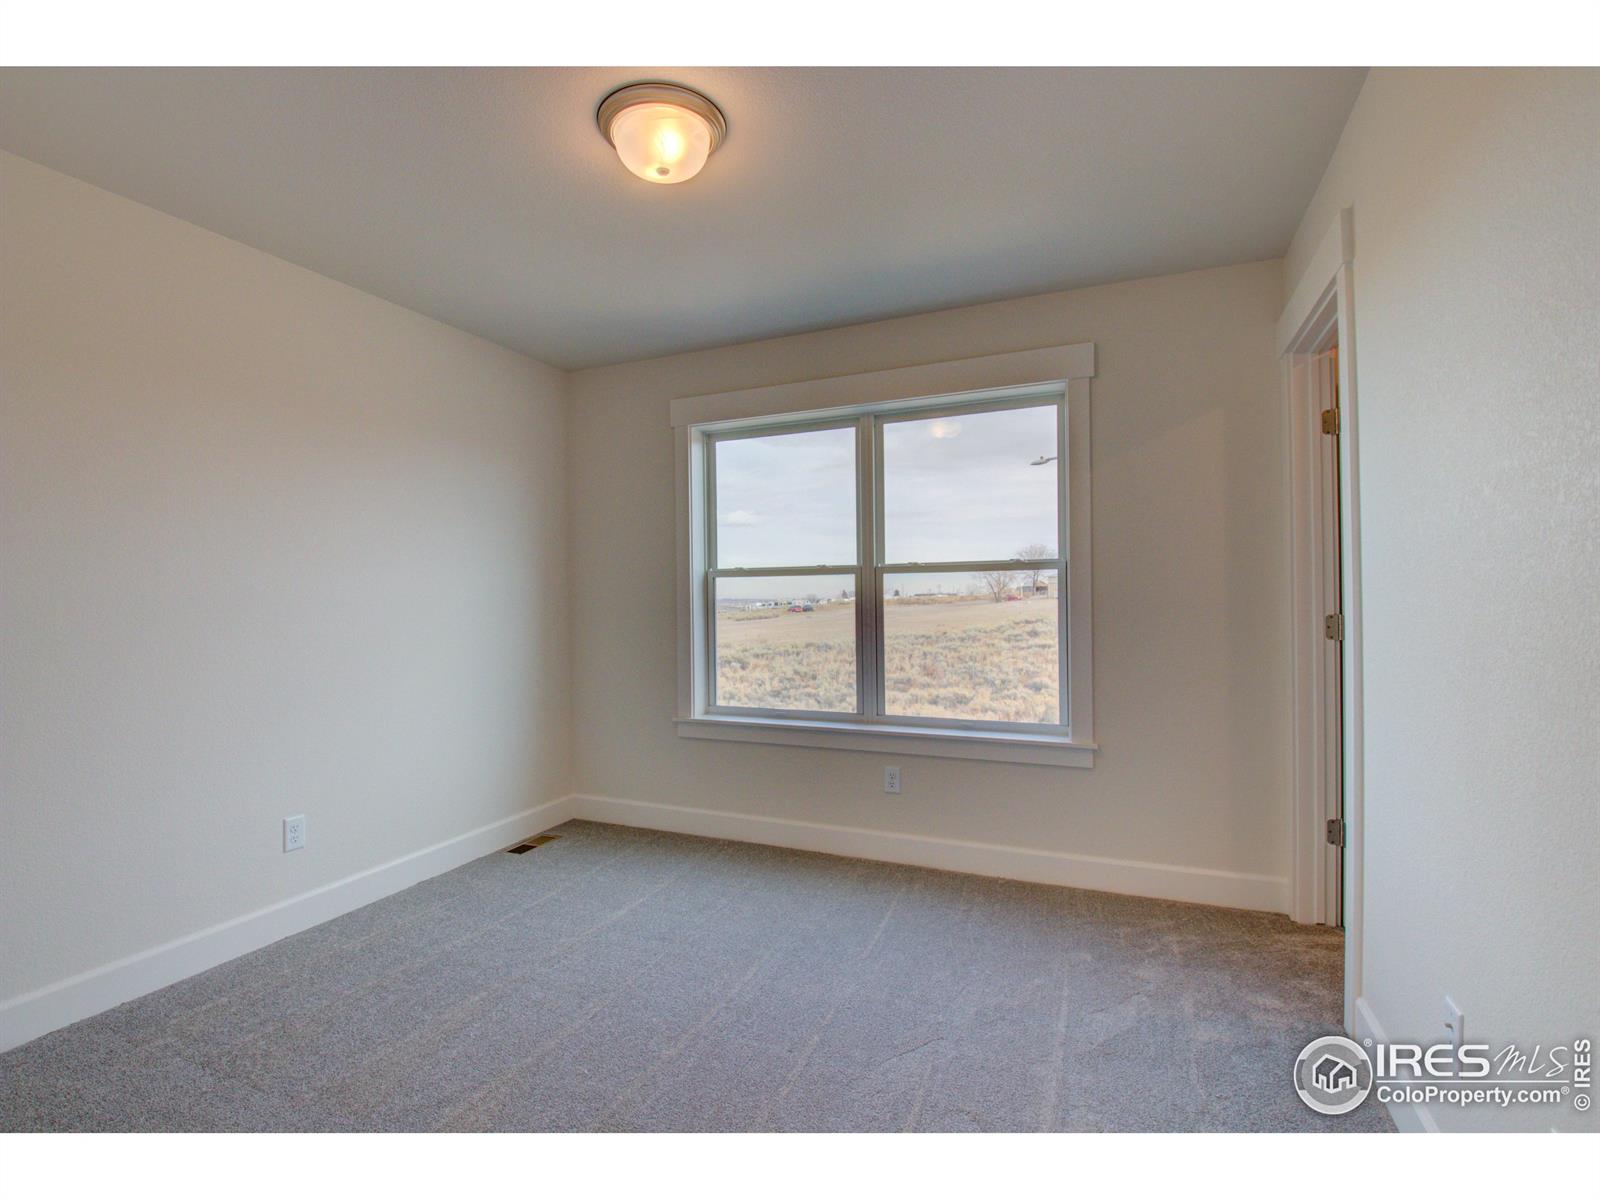 6017 13th, Greeley, CO